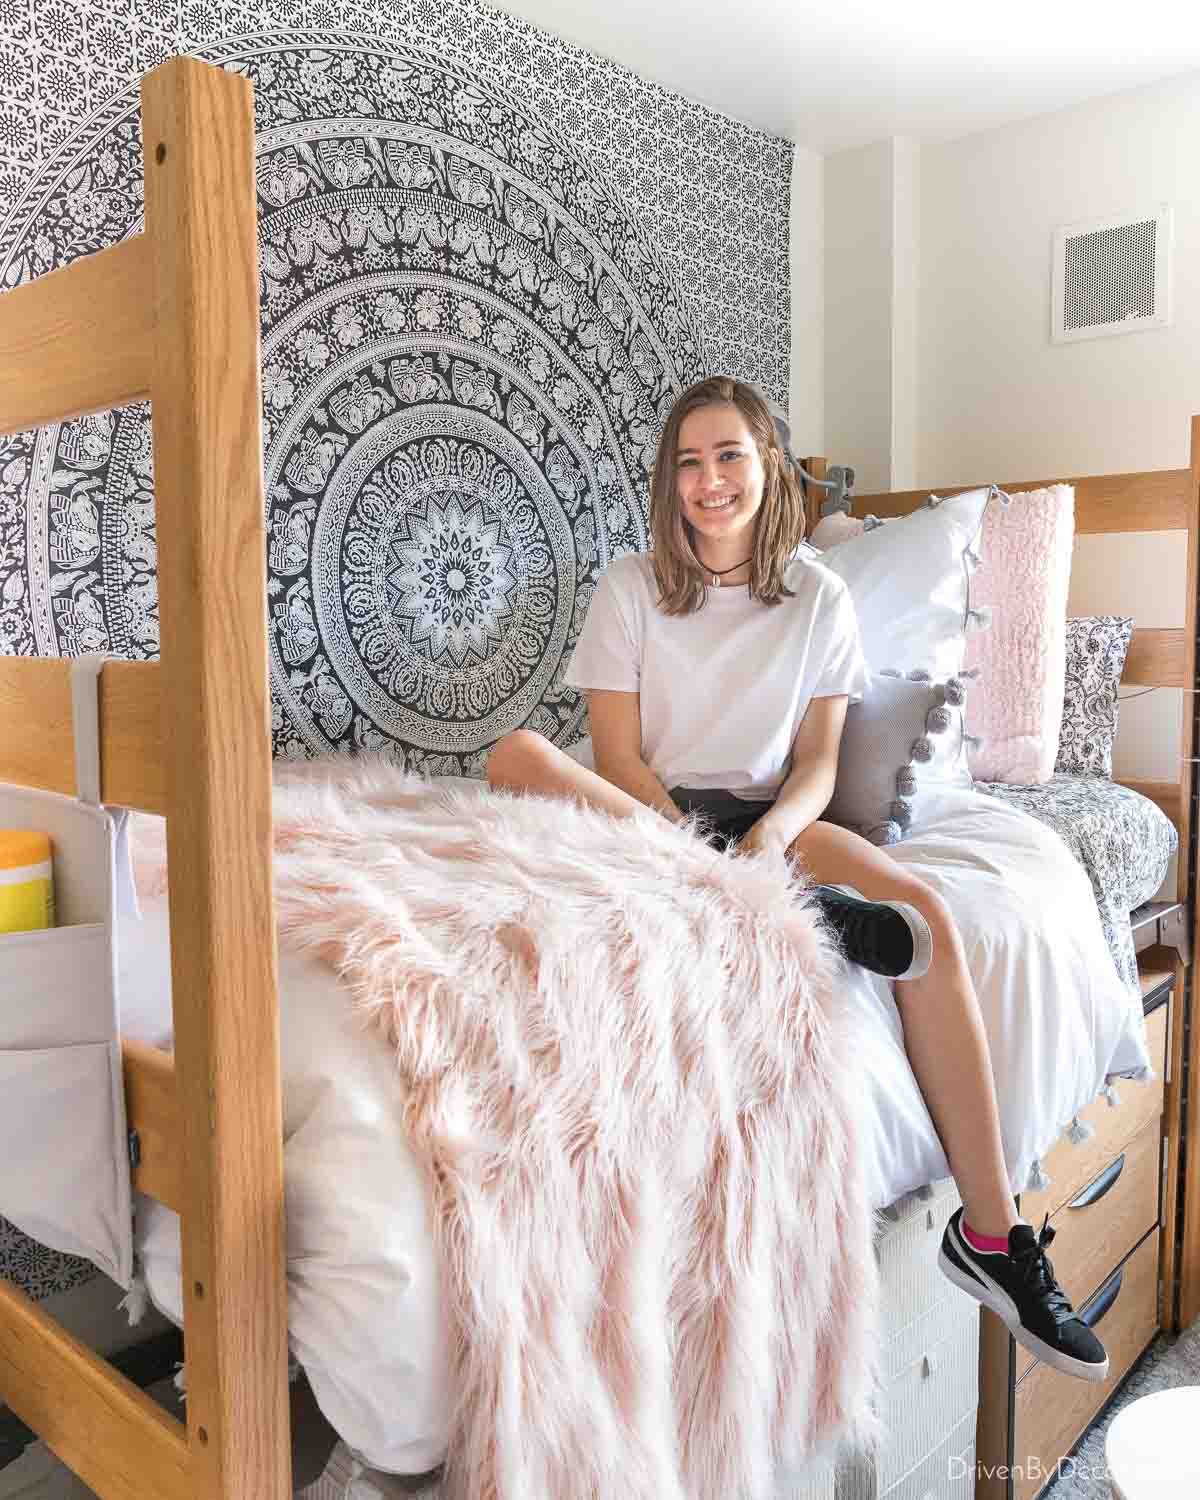 A large scale black and white tapestry on the wall in a dorm room